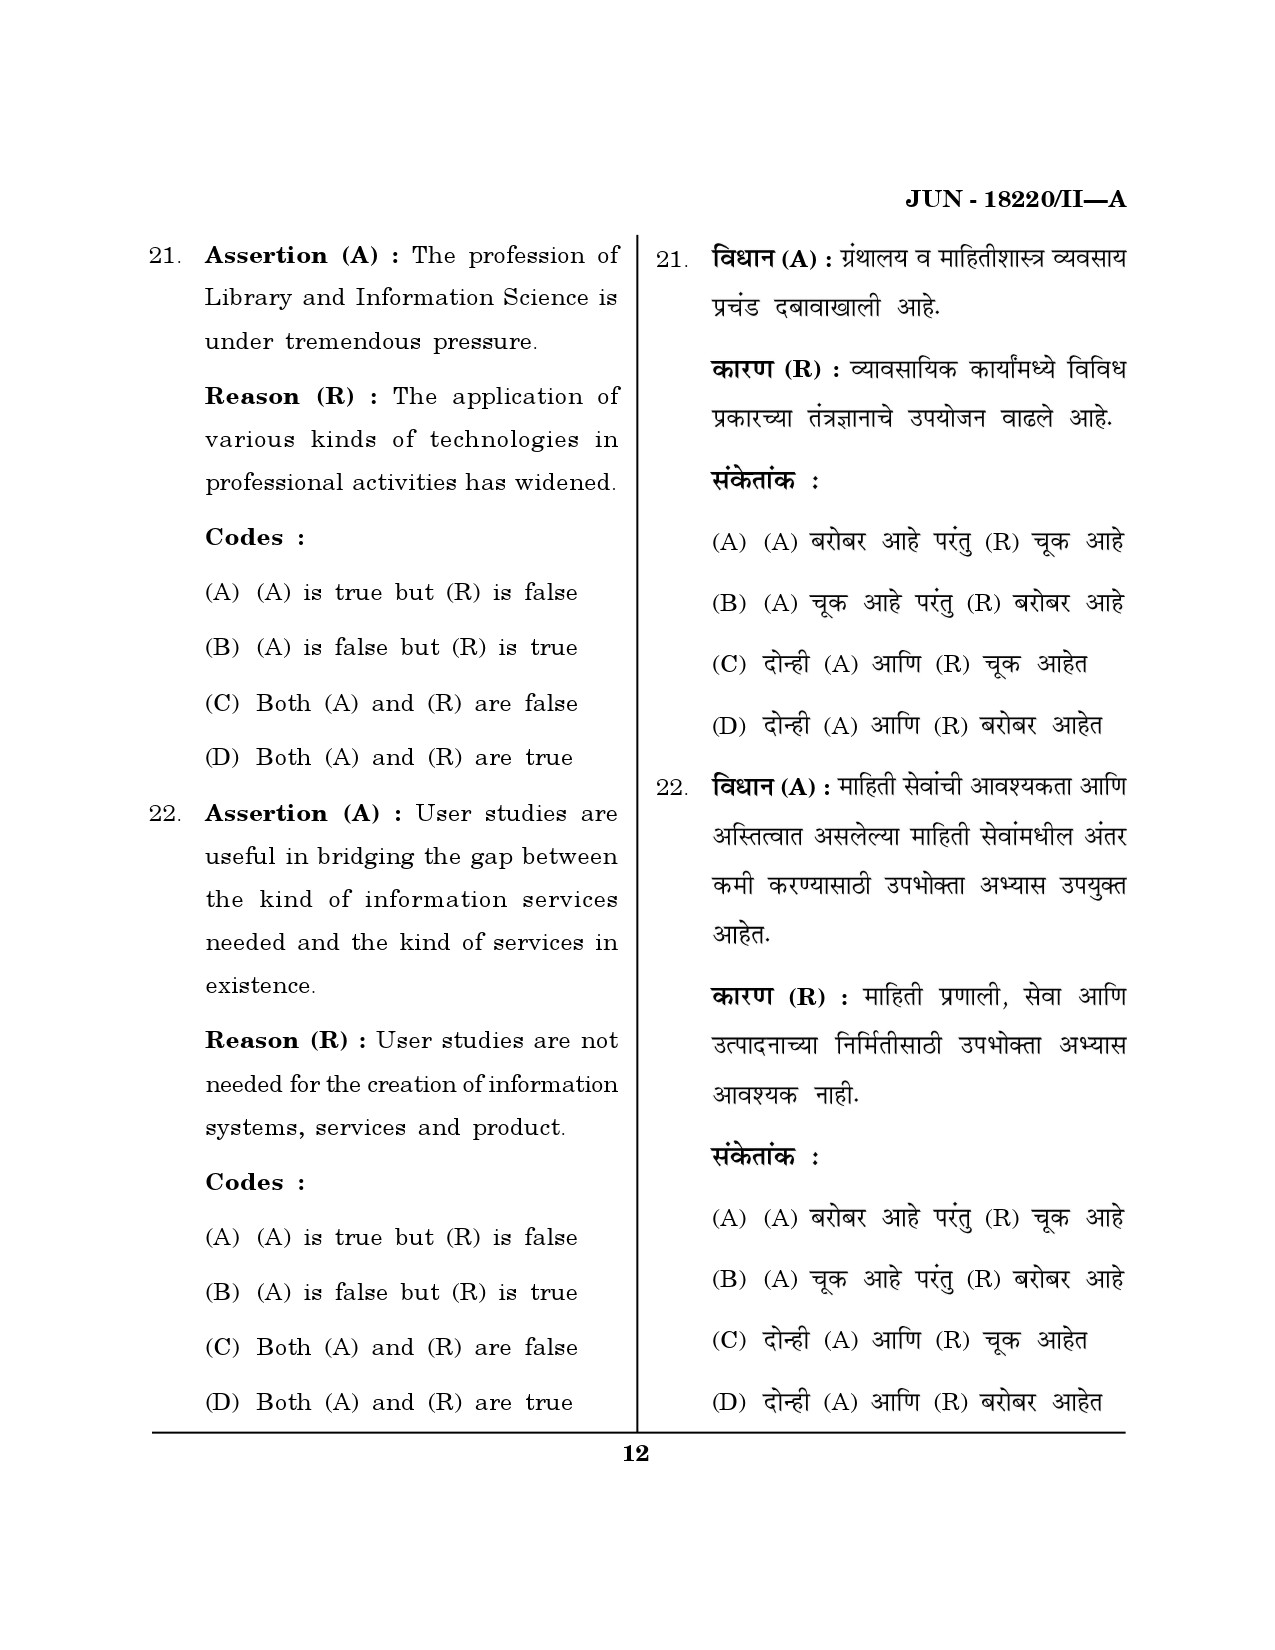 Maharashtra SET Library Information Science Question Paper II June 2020 11